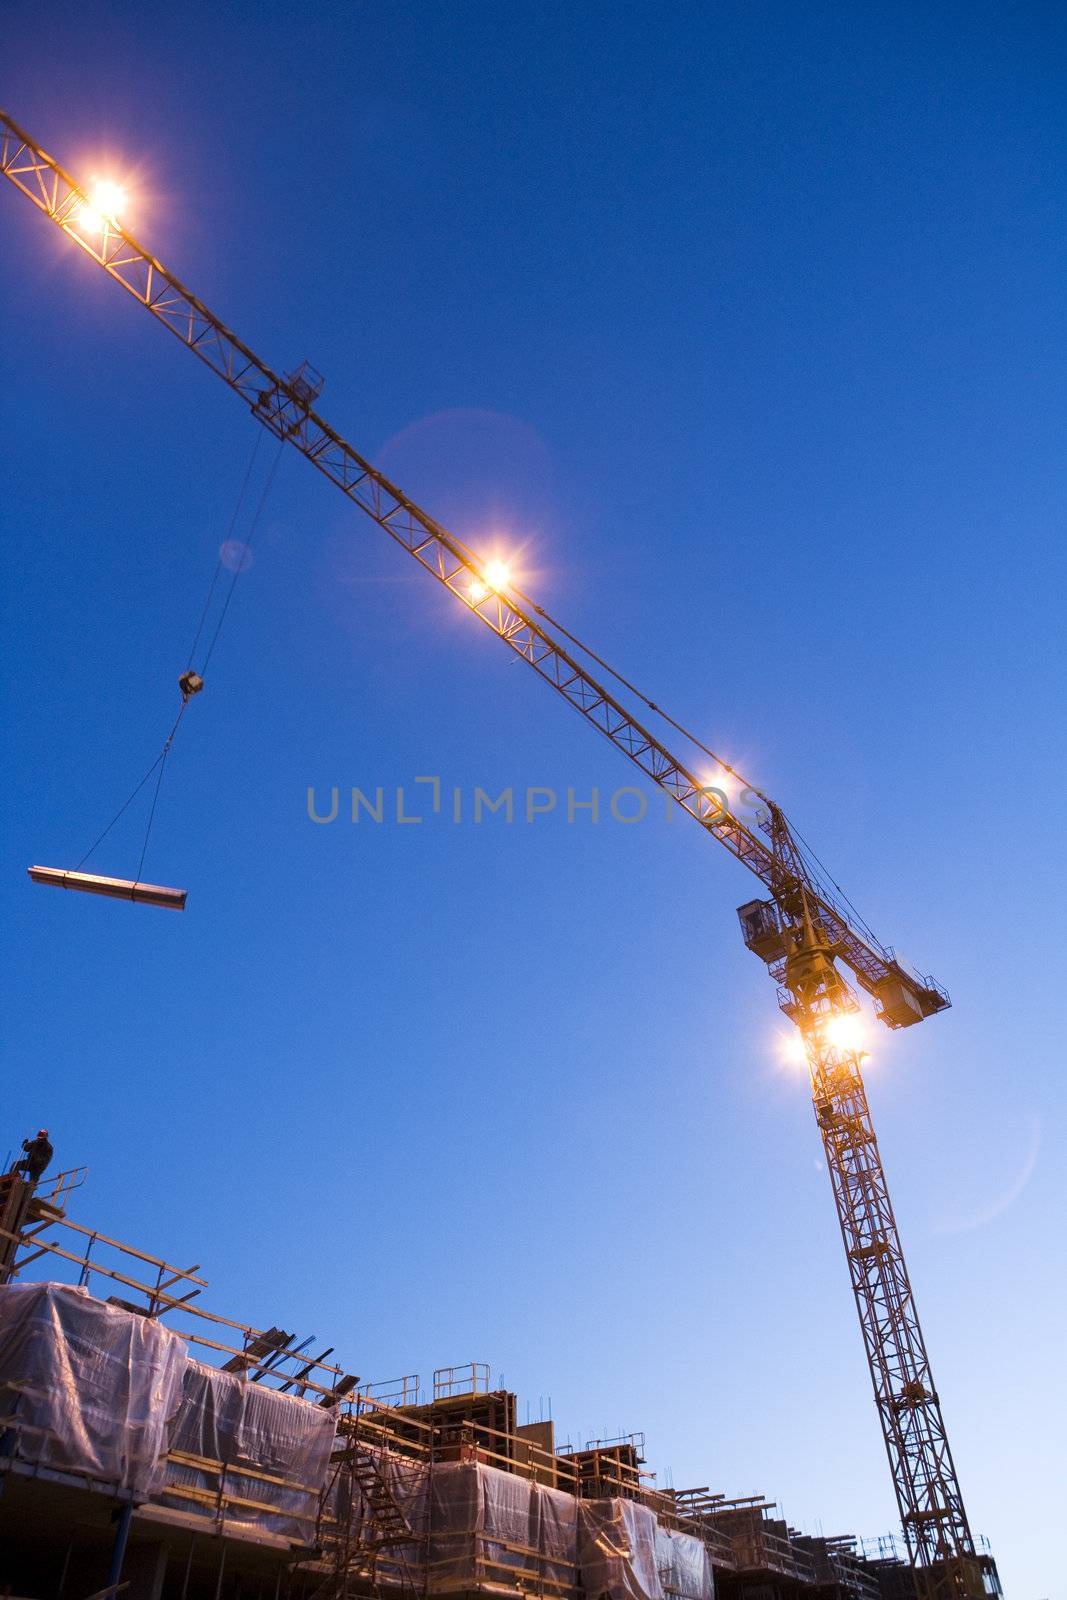 Construction site at night from low angle view